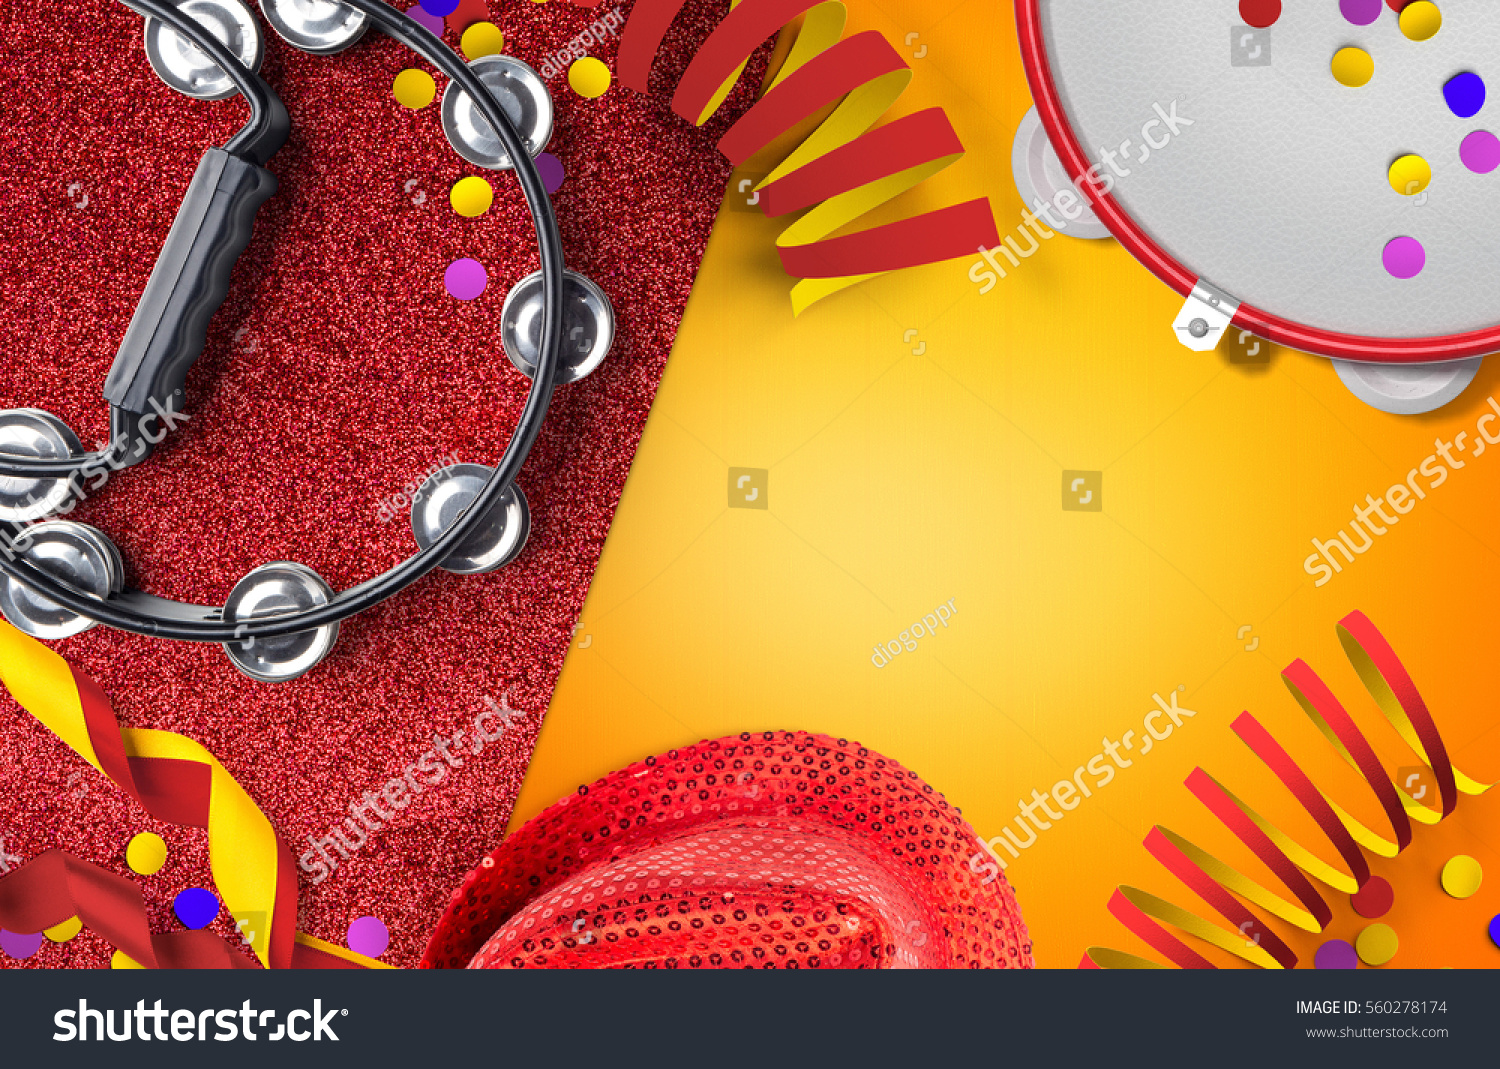 Carnaval background with space for text #560278174